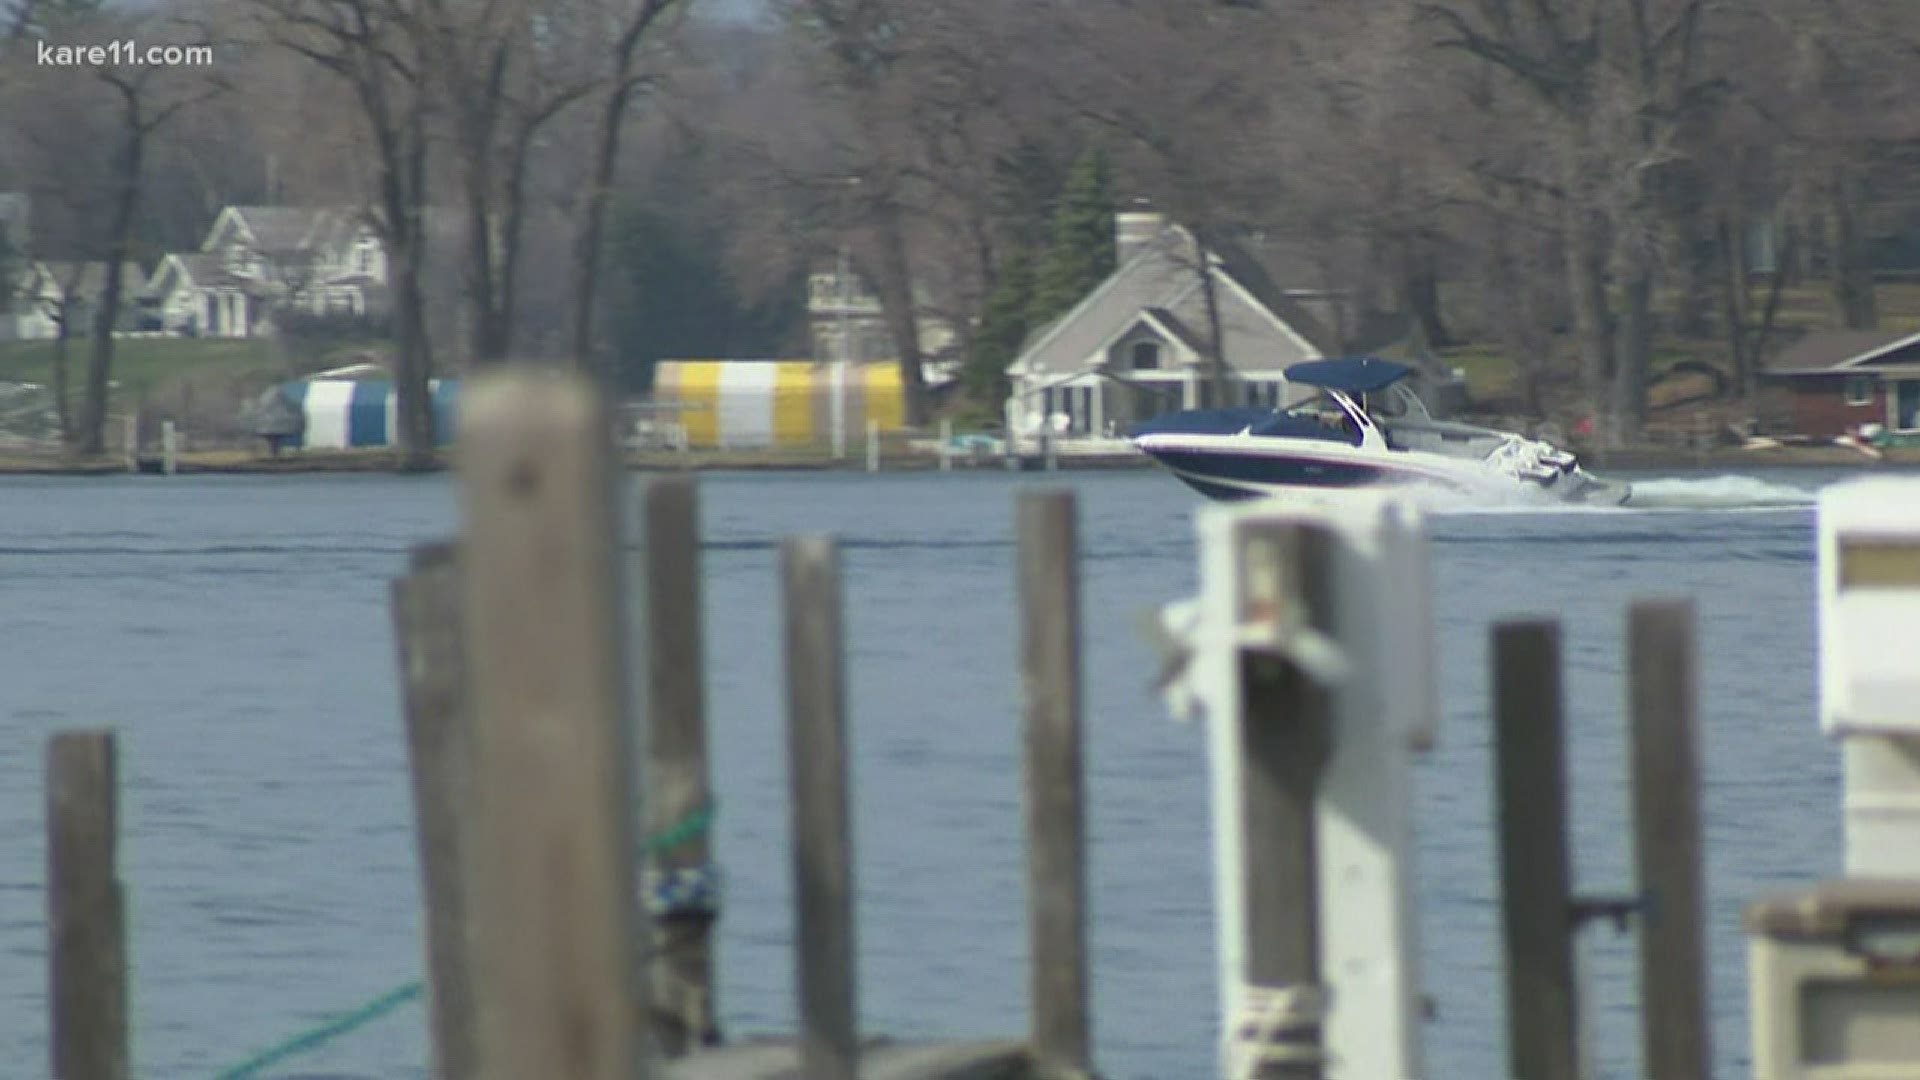 Although some restrictions will remain, boating and fishing with go on as planned this summer in Minnesota.